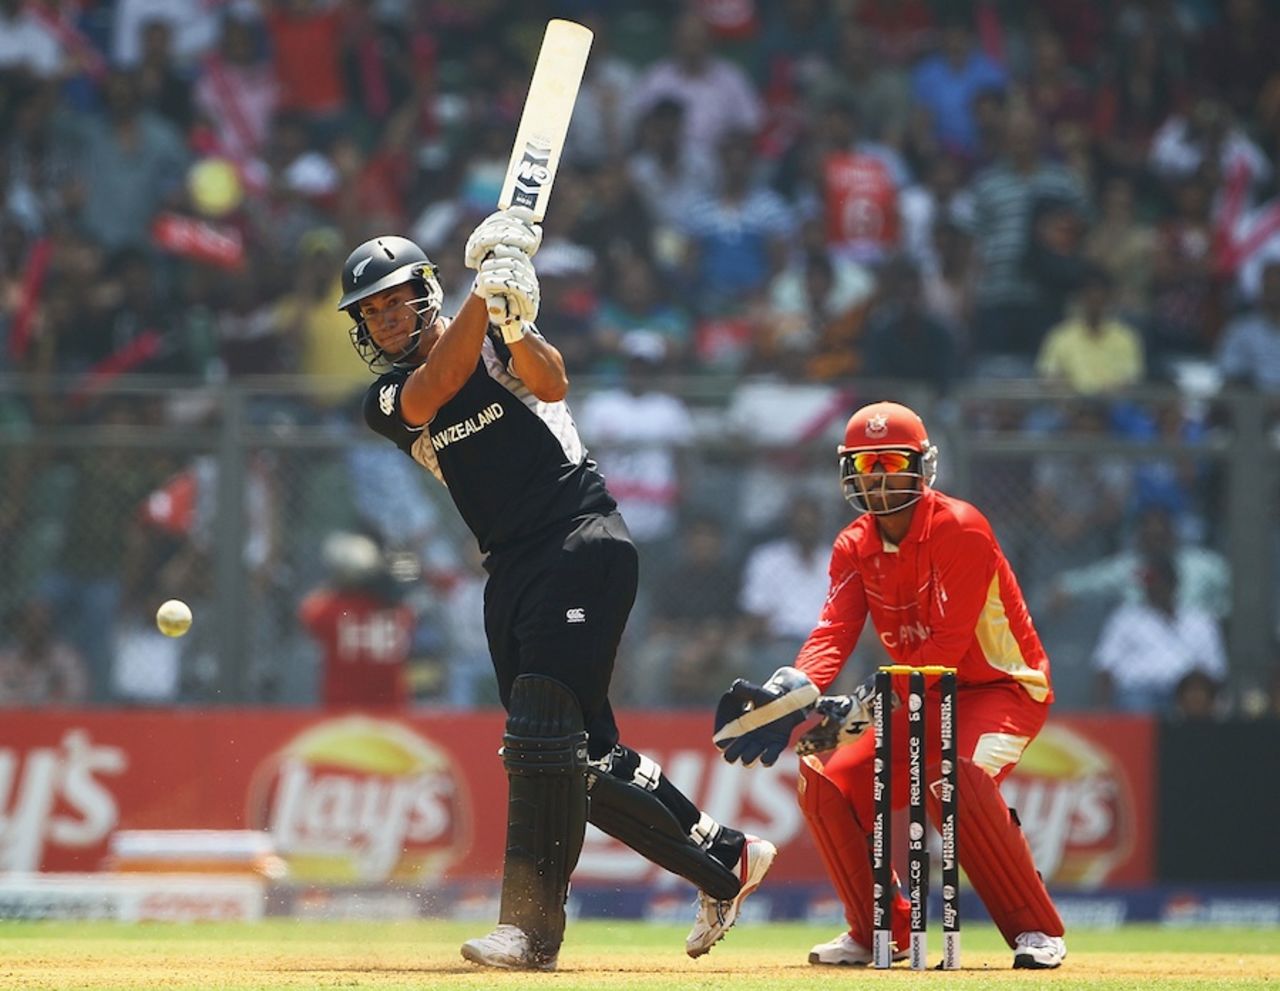 Ross Taylor blitzed 74 off 44 balls, Canada v New Zealand, Group A, World Cup 2011, Mumbai, March 13, 2011